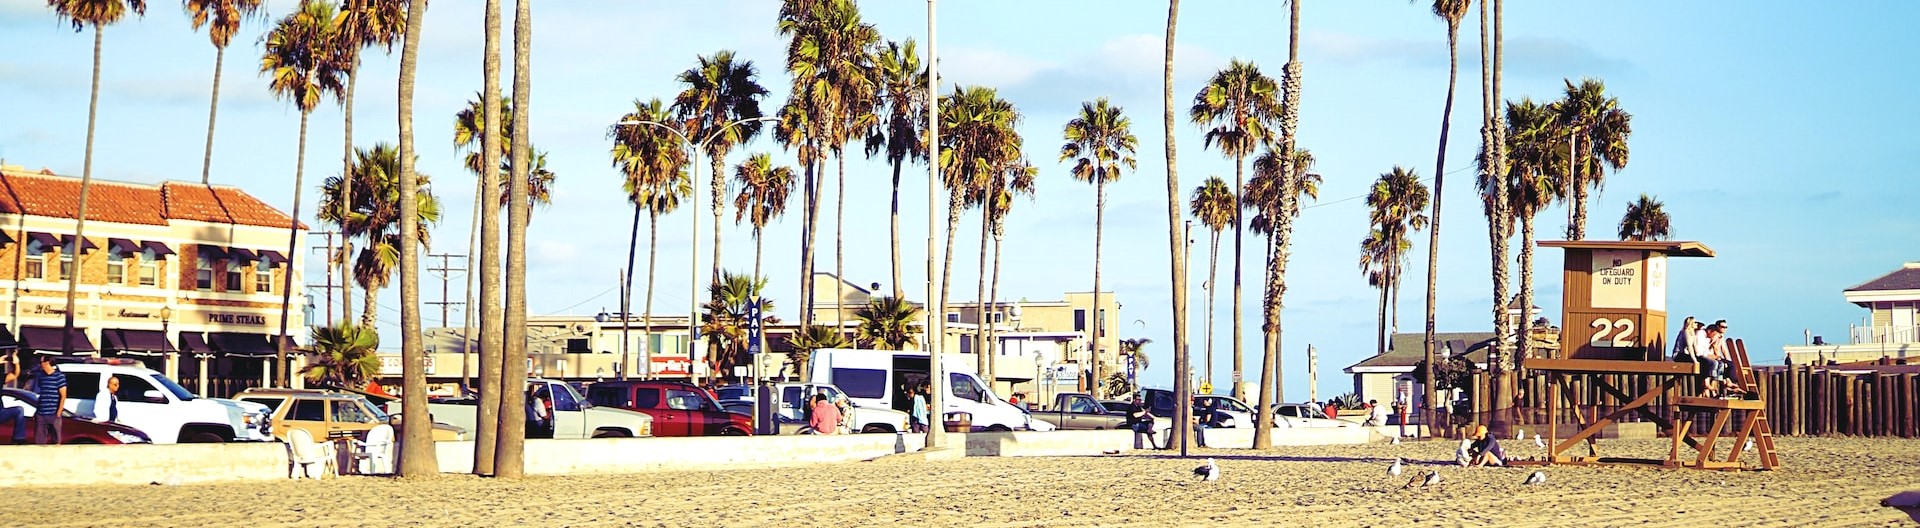 Beach front in santa ana | Breast Cancer Car Donations